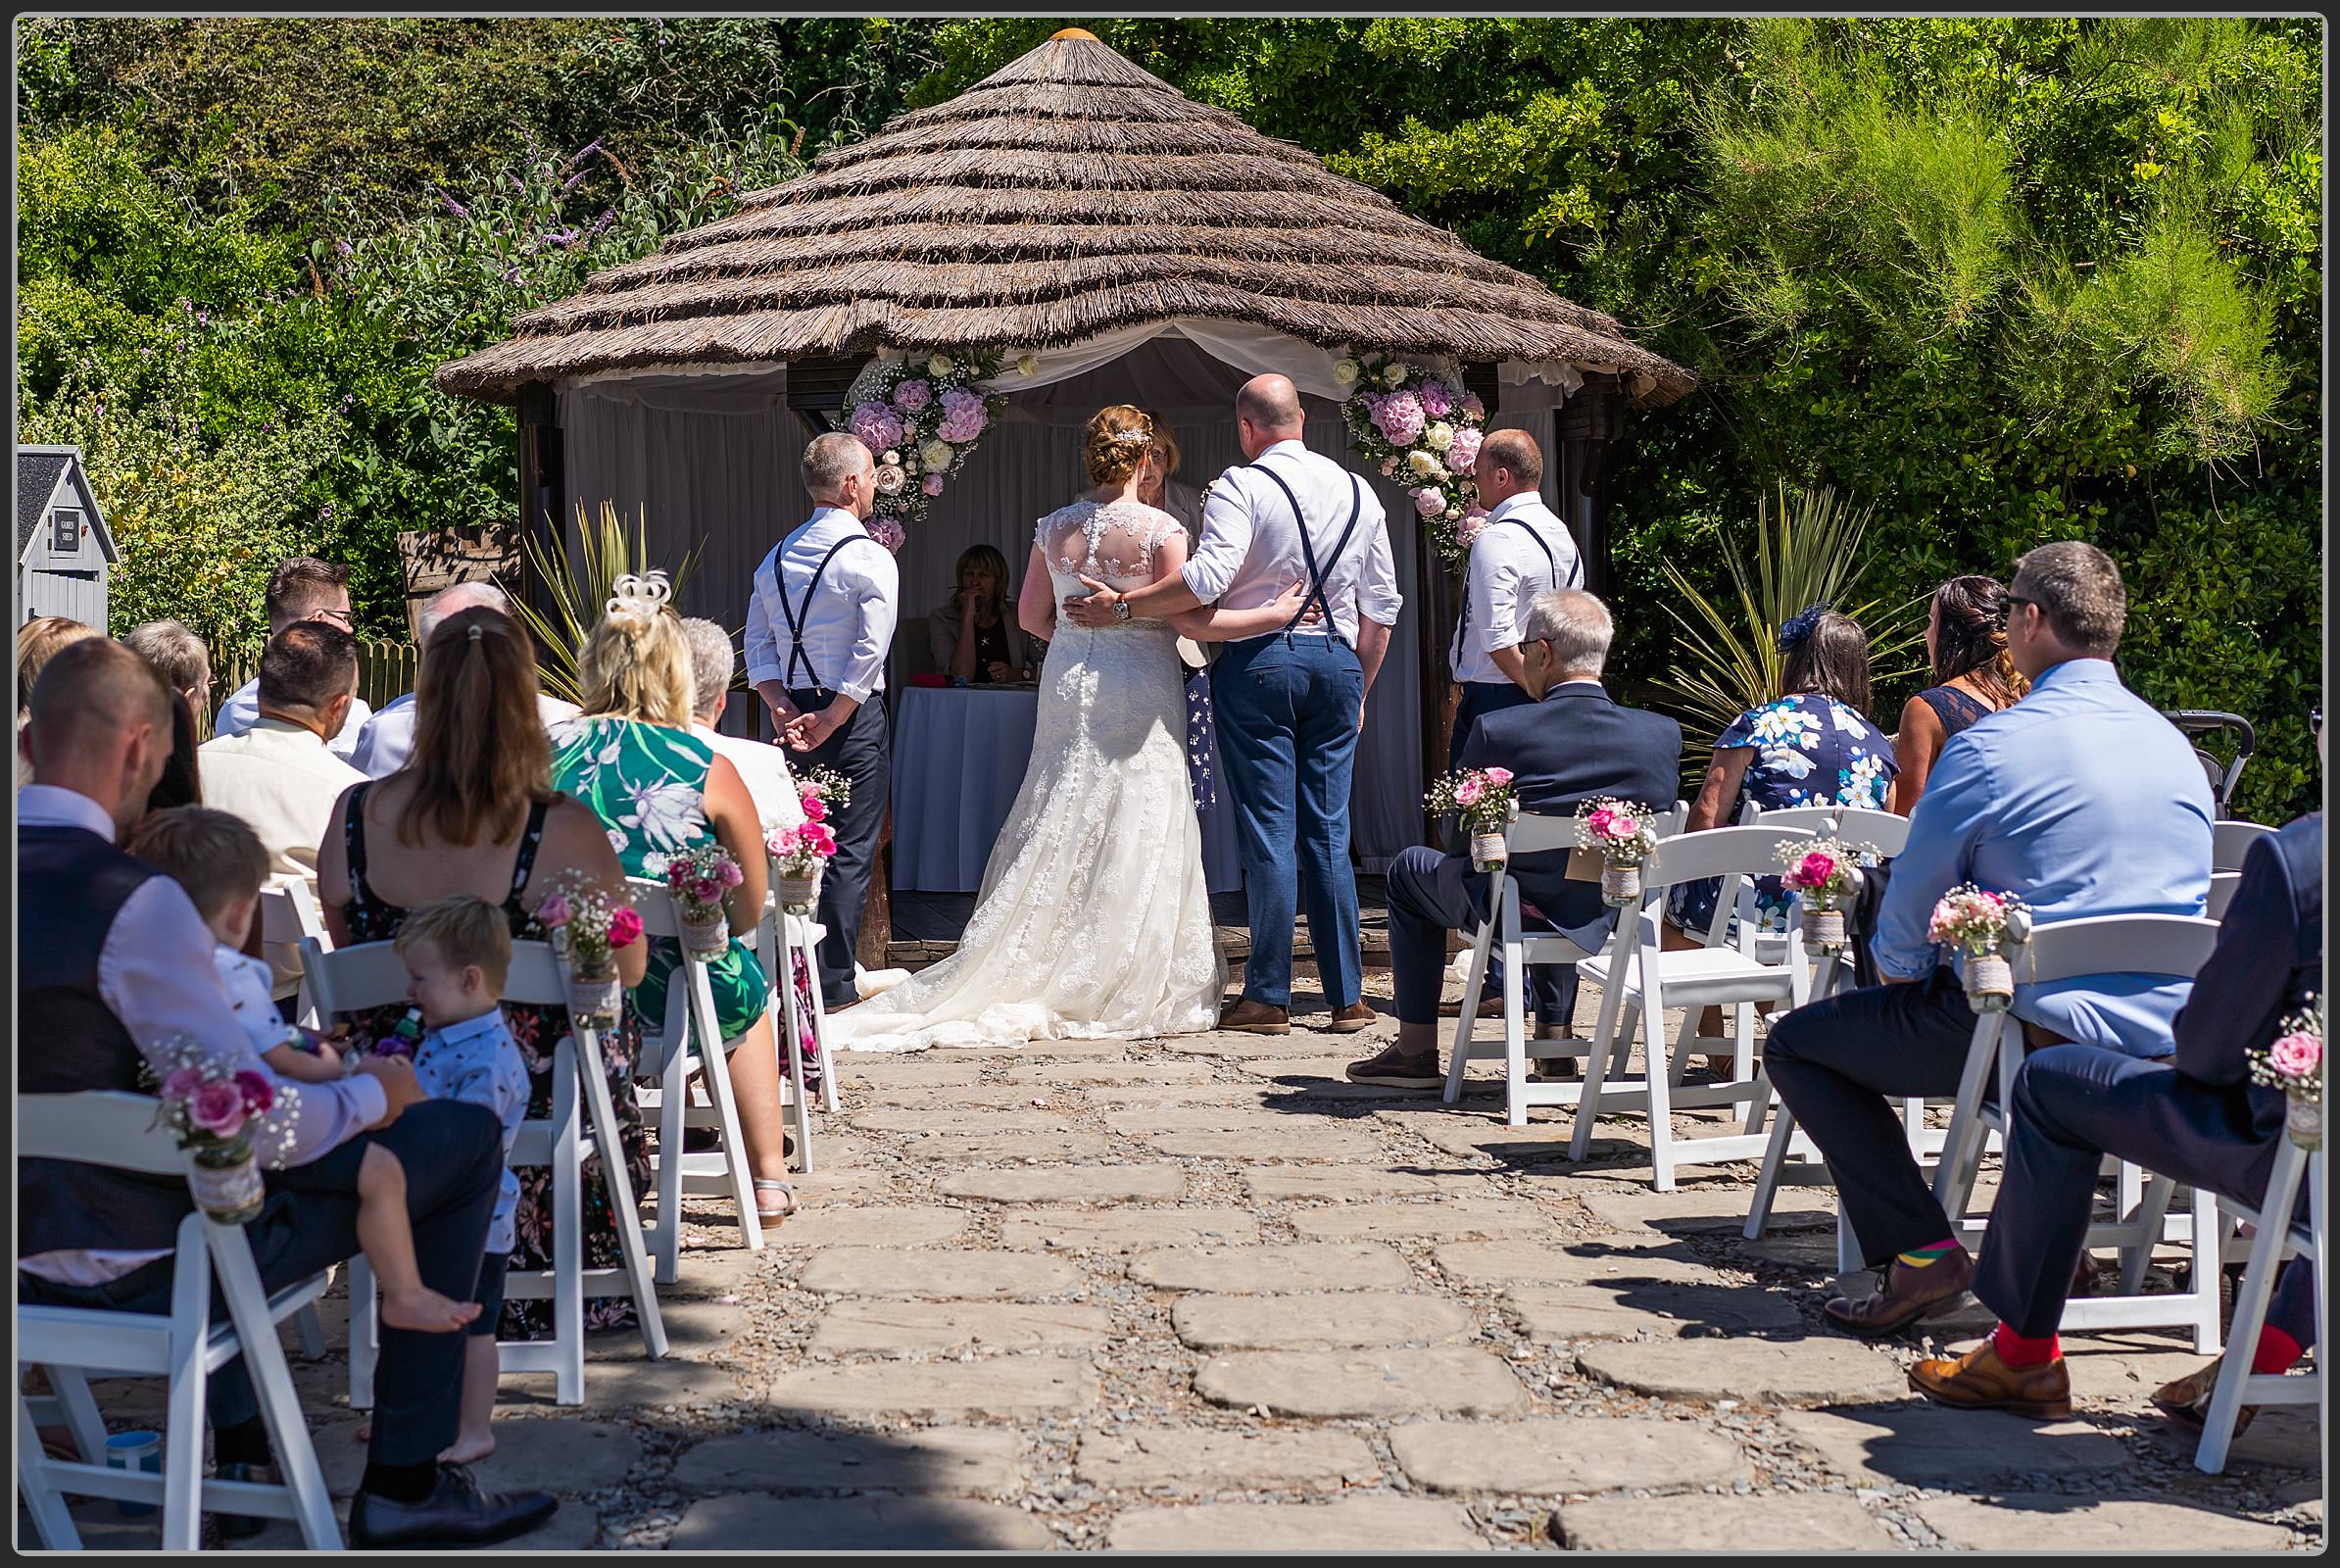 The wedding ceremony at Polhawn Fort